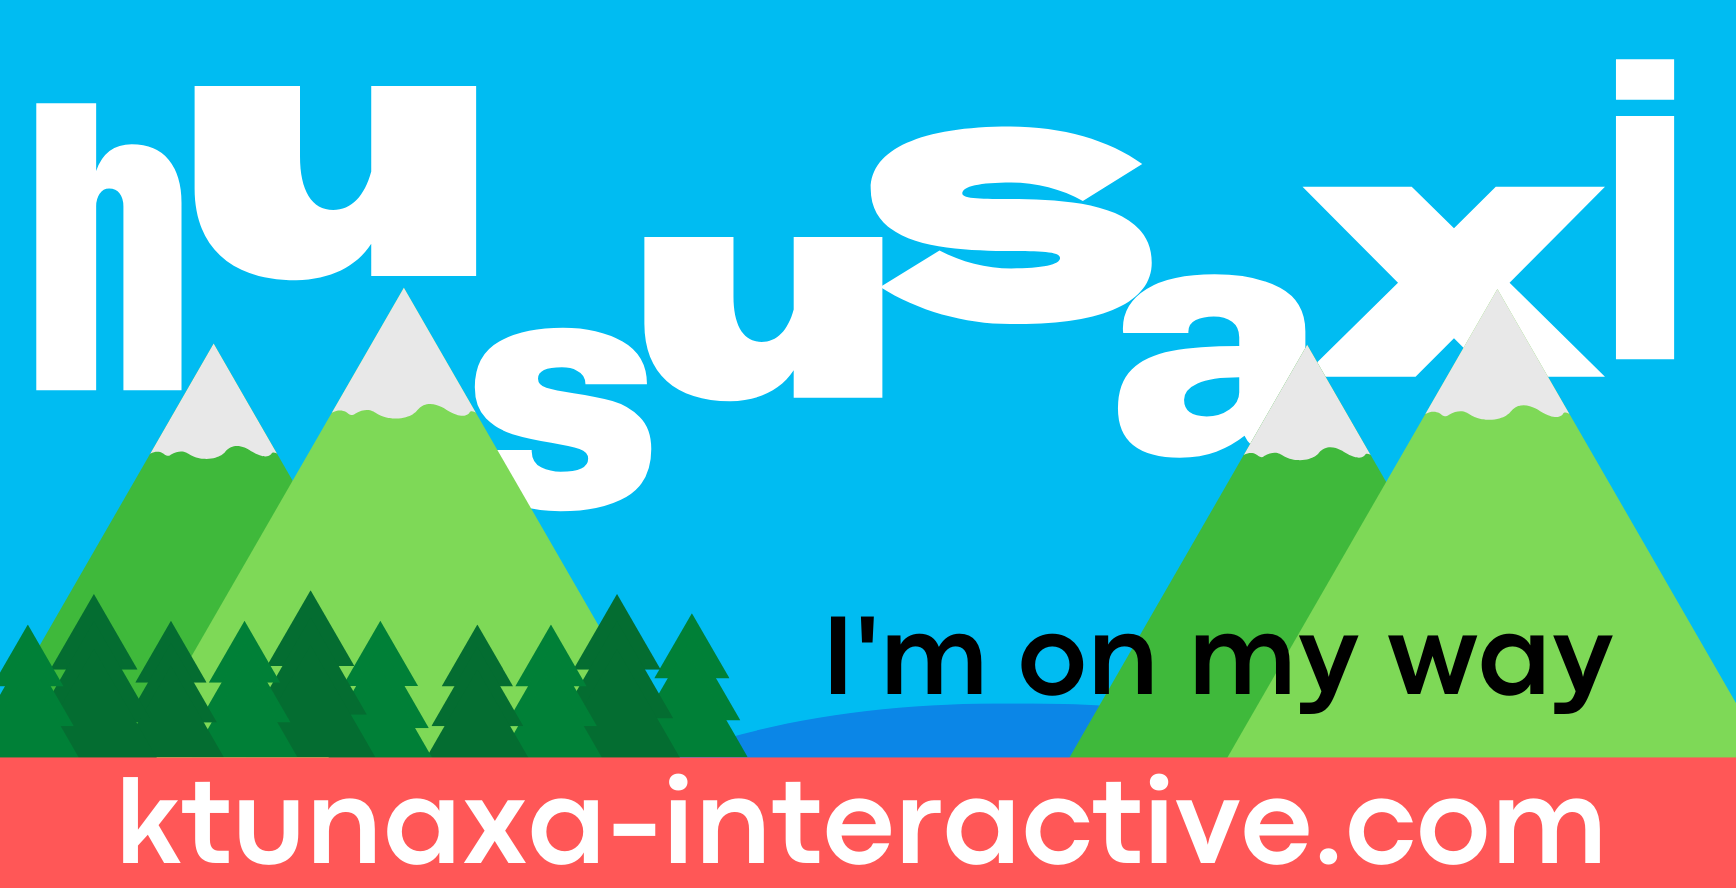 This is our bumper sticker. Hu susaxi means 'I'm on my way.'